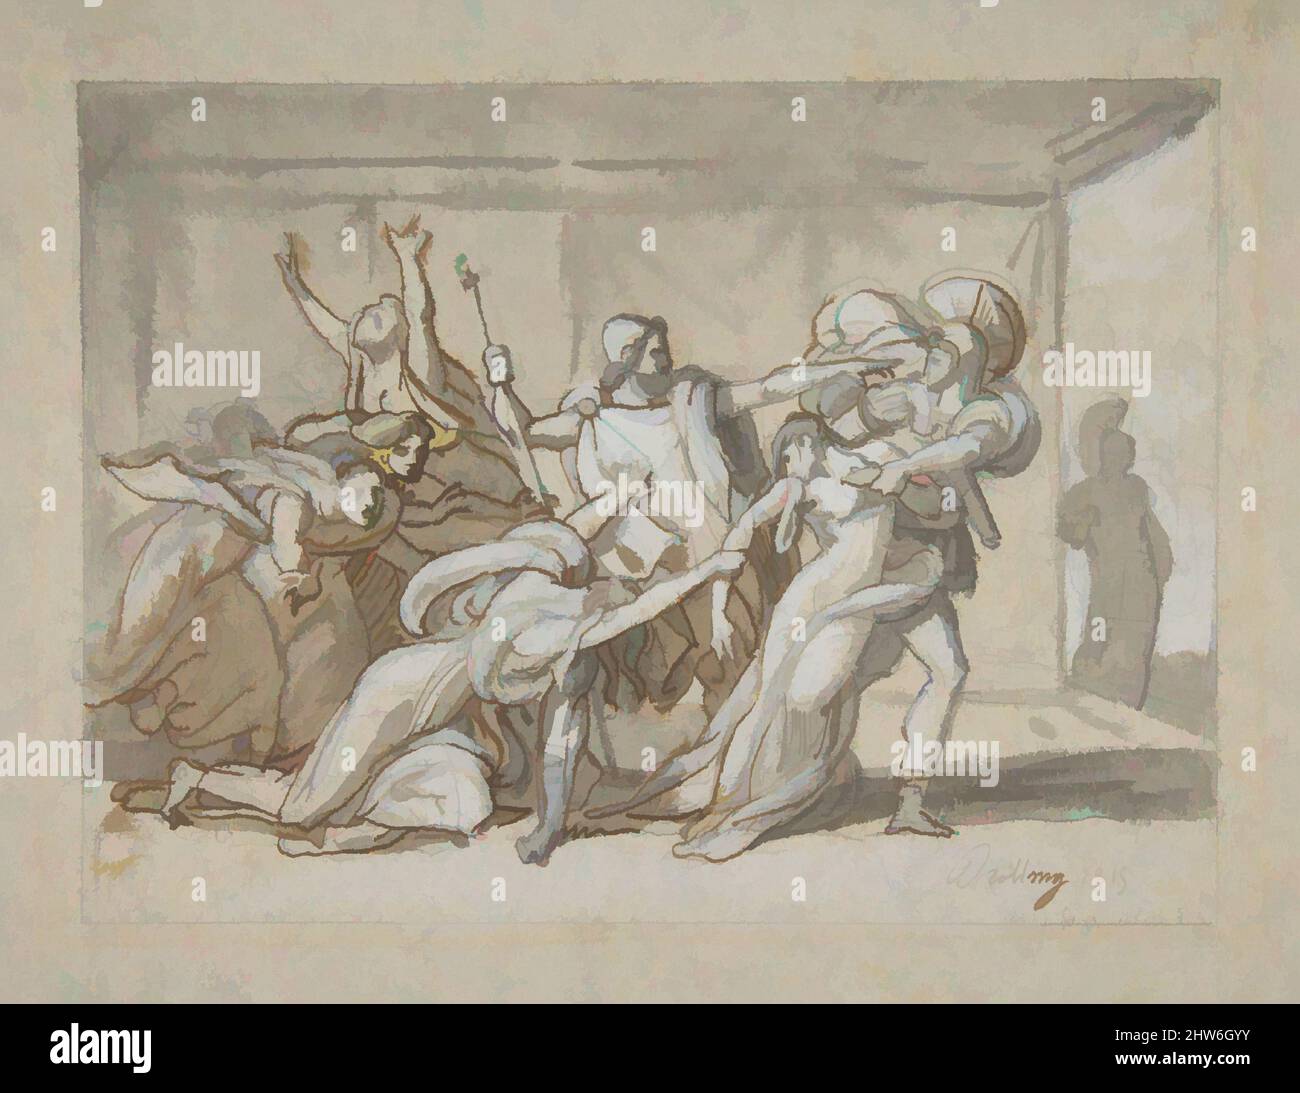 Art inspired by Scene from the Iliad, 1815, Pen and brown ink, brush and gray wash, heightened with white gouache over graphite underdrawing, sheet: 8 1/16 x 10 7/16 in. (20.5 x 26.5 cm), Drawings, Michael Martin Drölling (French, Paris 1786–1851 Paris, Classic works modernized by Artotop with a splash of modernity. Shapes, color and value, eye-catching visual impact on art. Emotions through freedom of artworks in a contemporary way. A timeless message pursuing a wildly creative new direction. Artists turning to the digital medium and creating the Artotop NFT Stock Photo